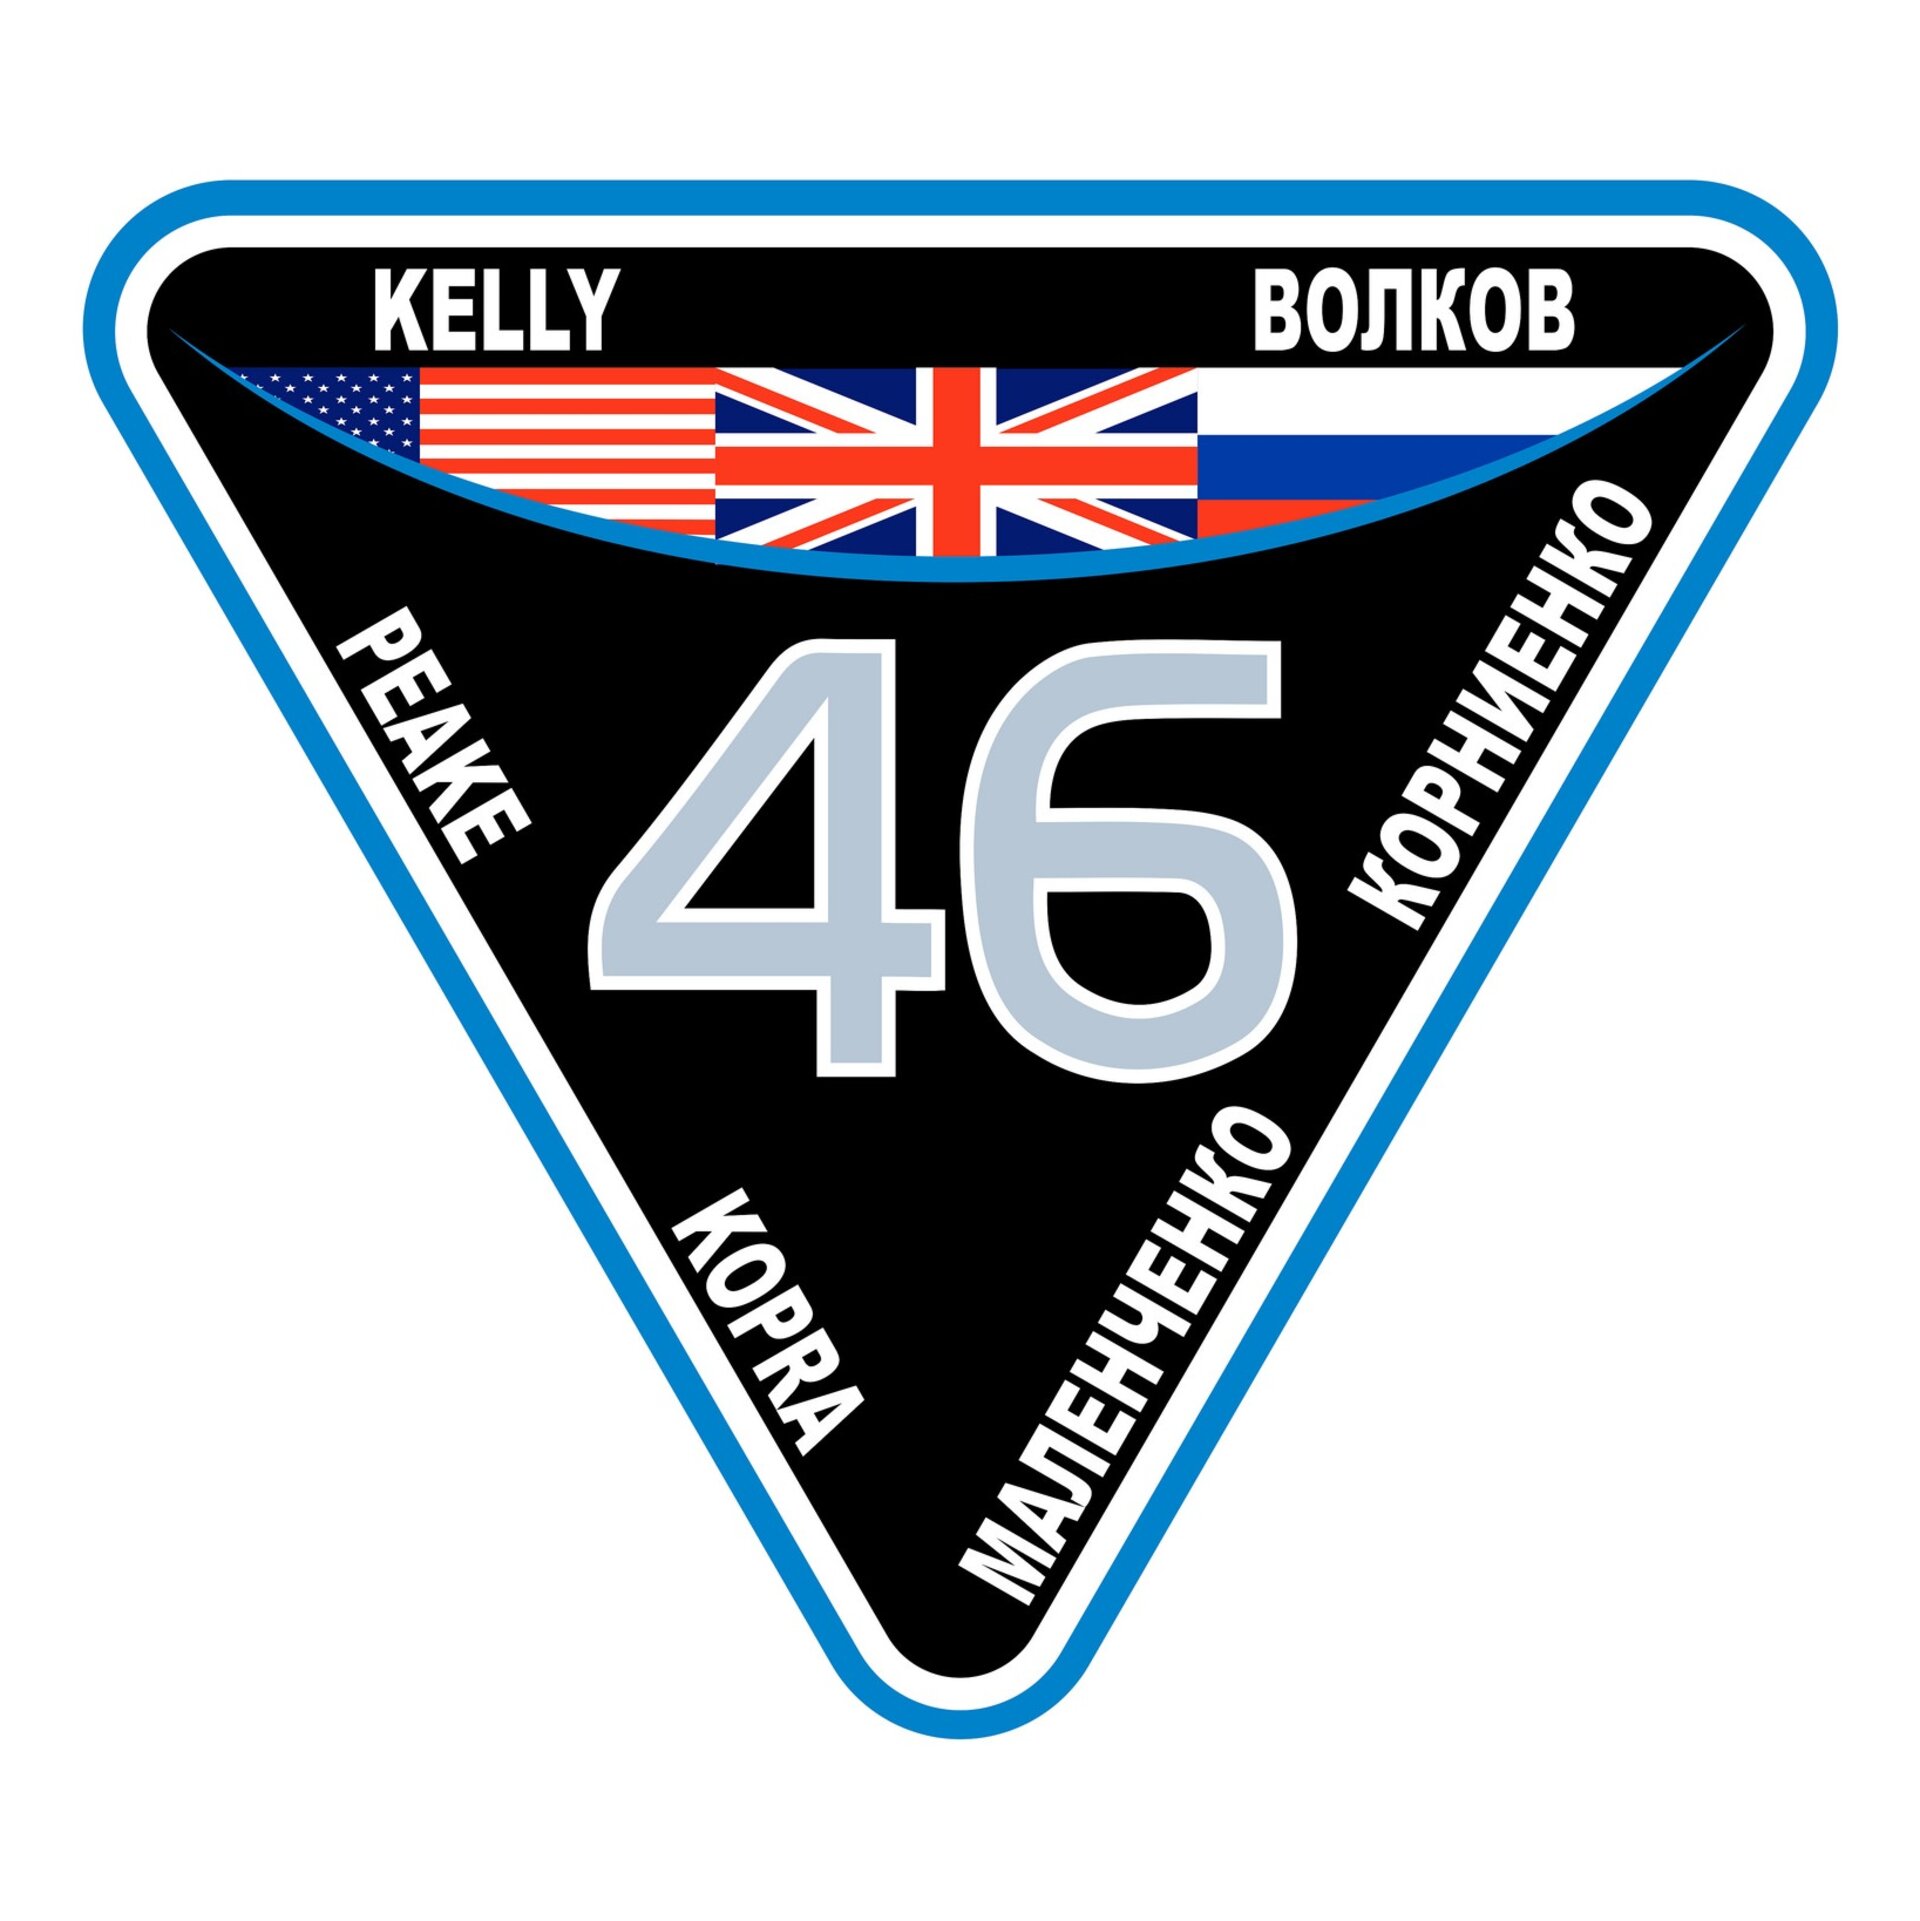 ISS Expedition 46 patch, 2015